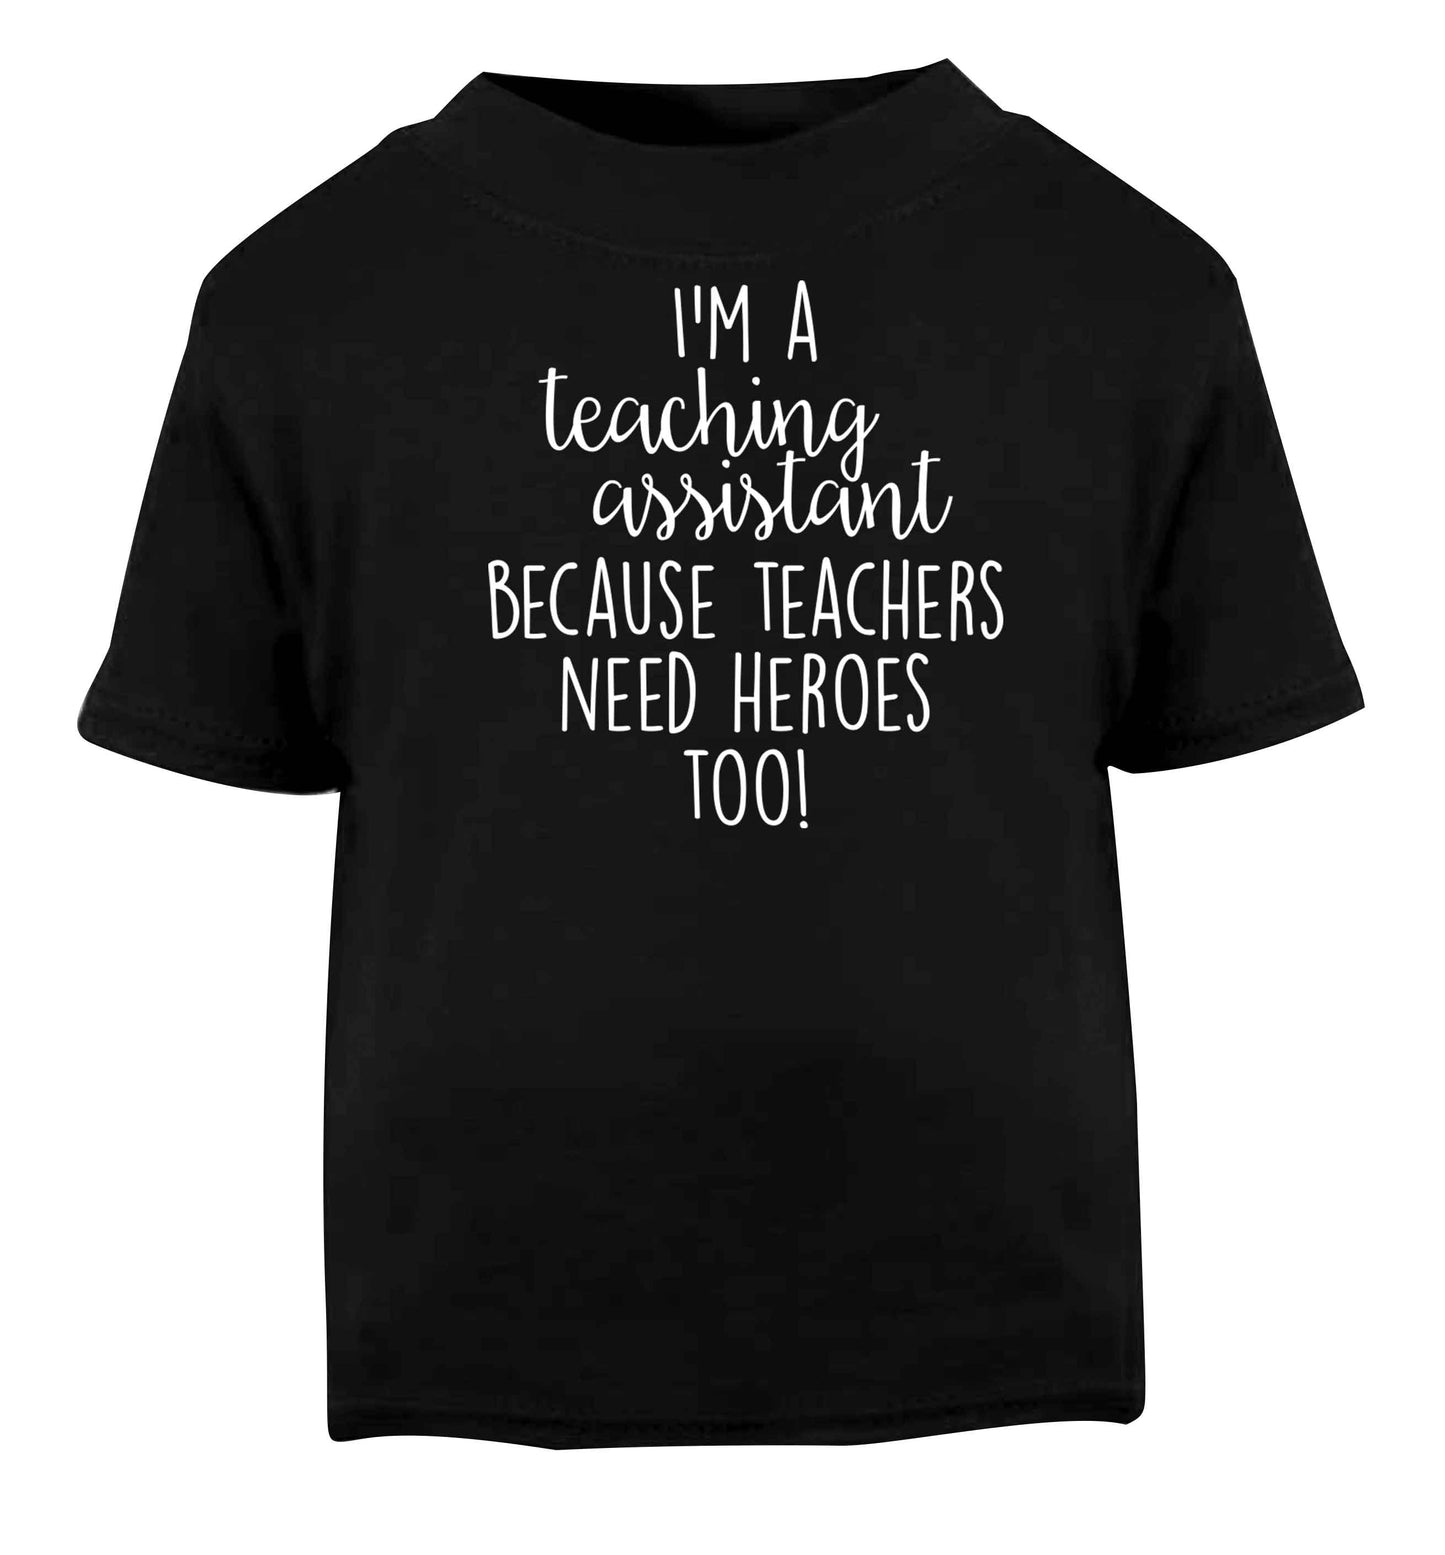 I'm a teaching assistant because teachers need heroes too! Black baby toddler Tshirt 2 years